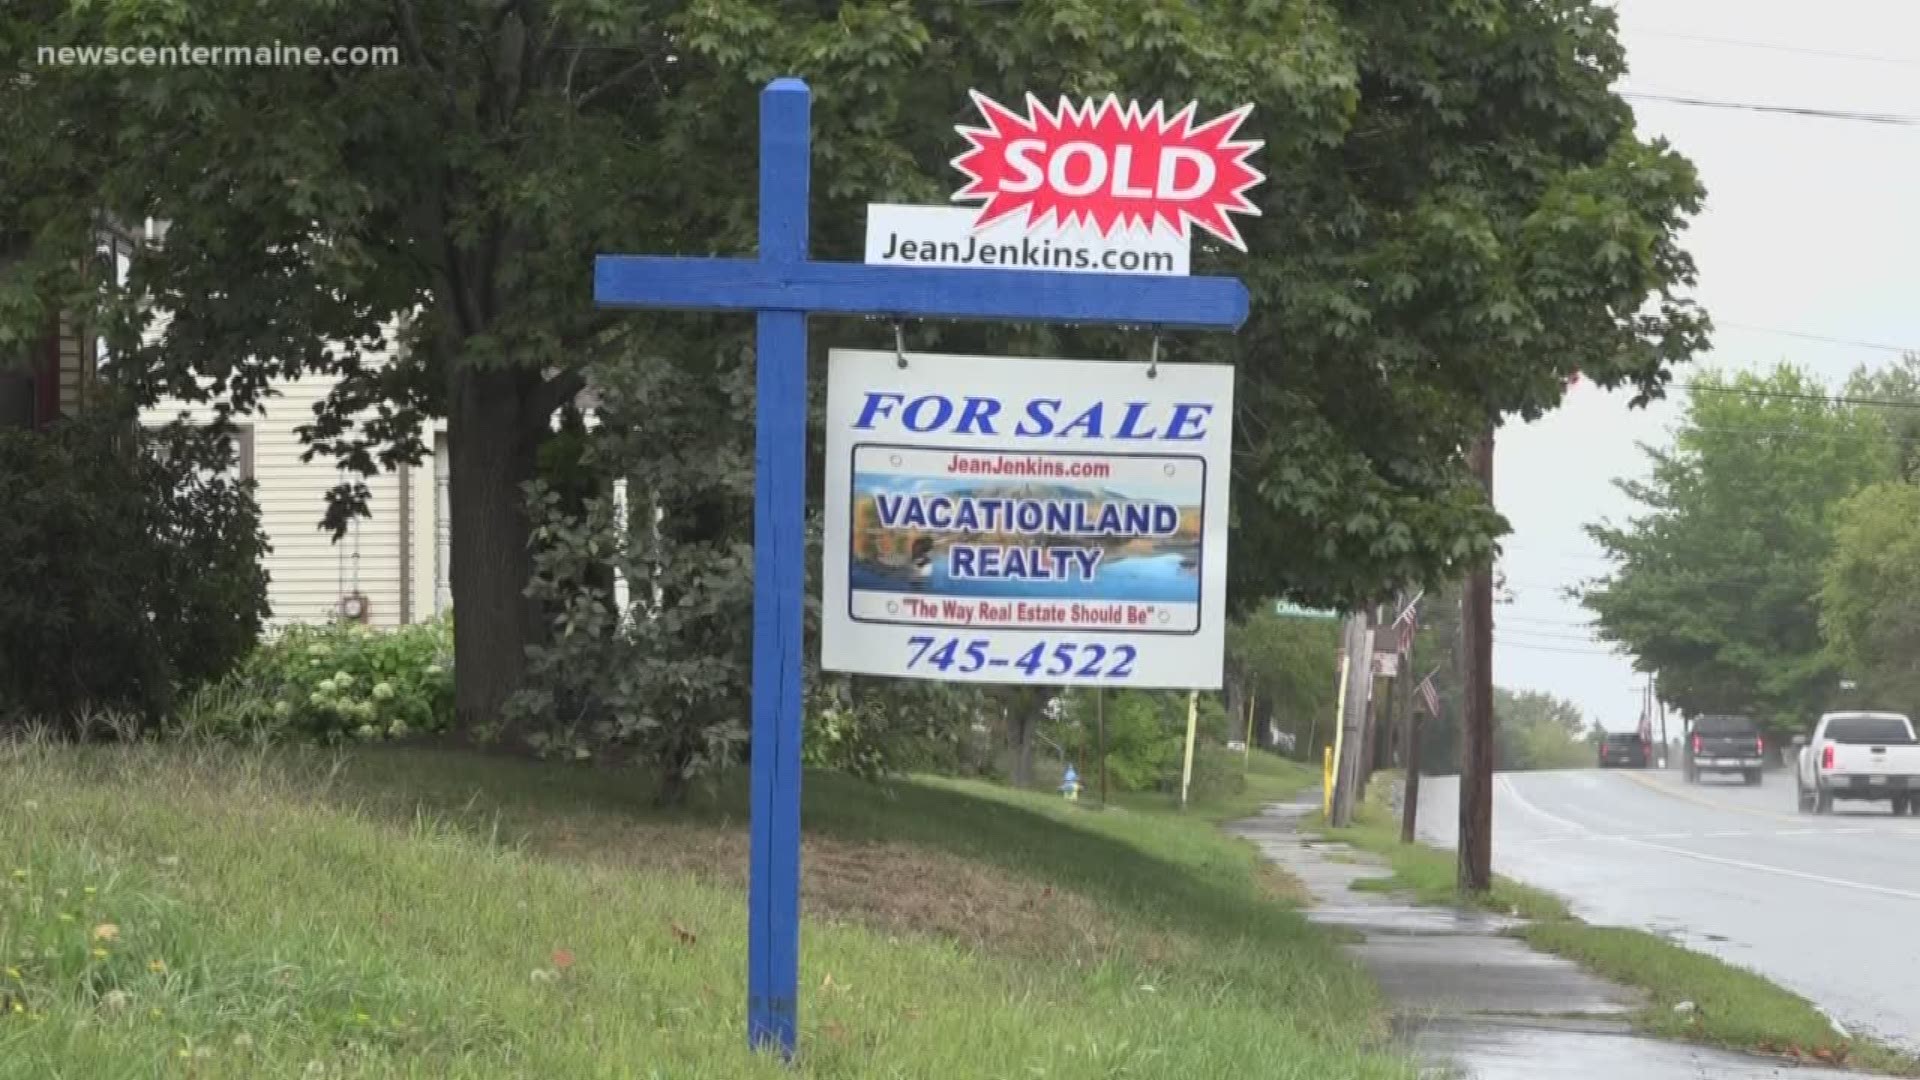 Maine real estate market is up in 2018